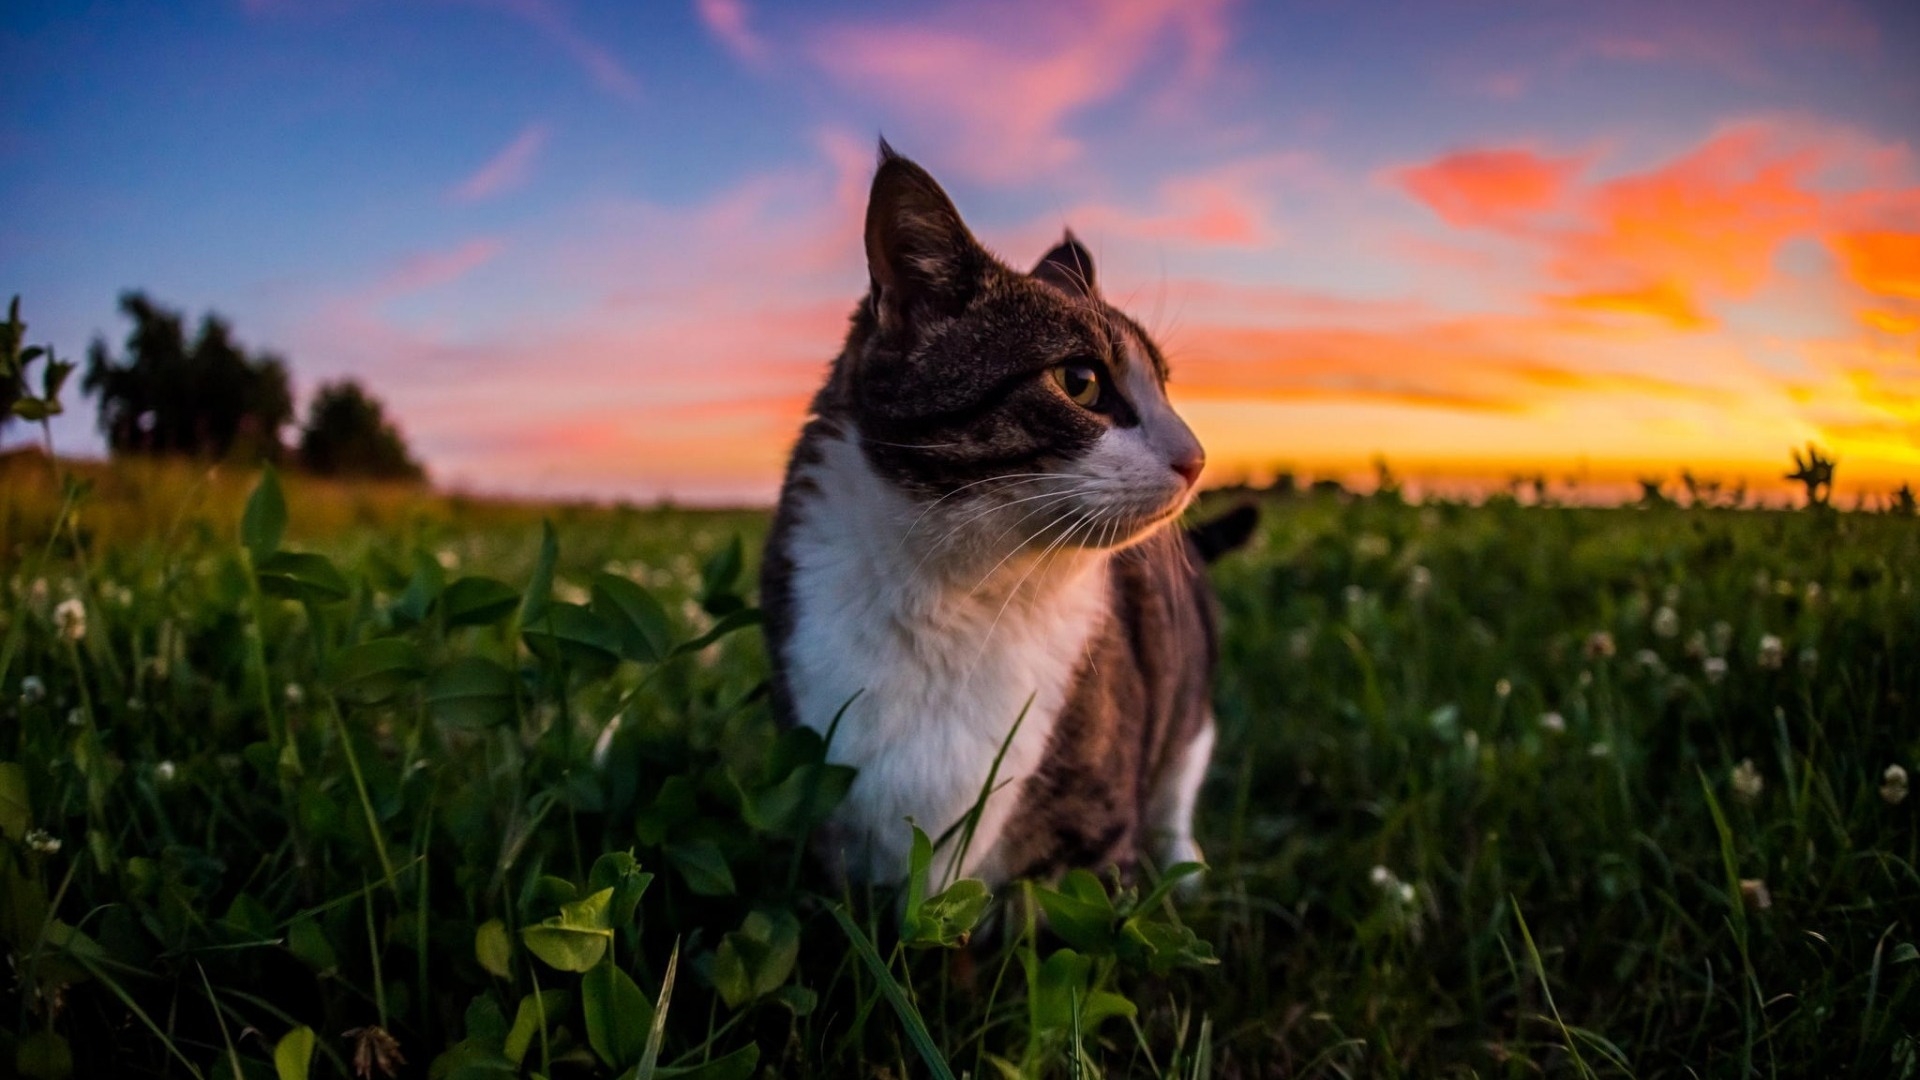 Gorgeous Little Cat and Sunset for 1920 x 1080 HDTV 1080p resolution